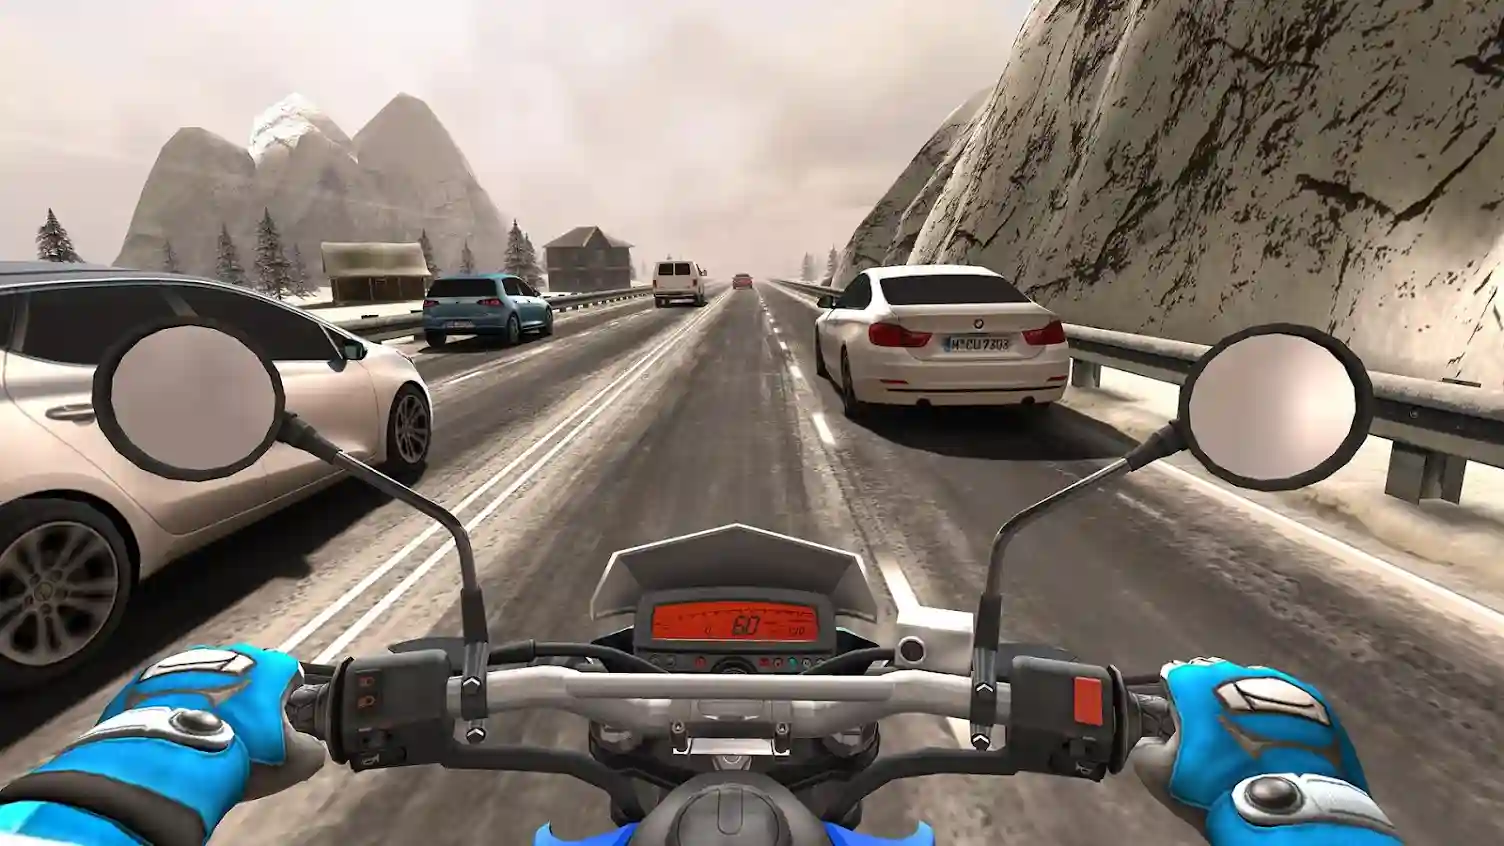 How Traffic Rider Game Works?